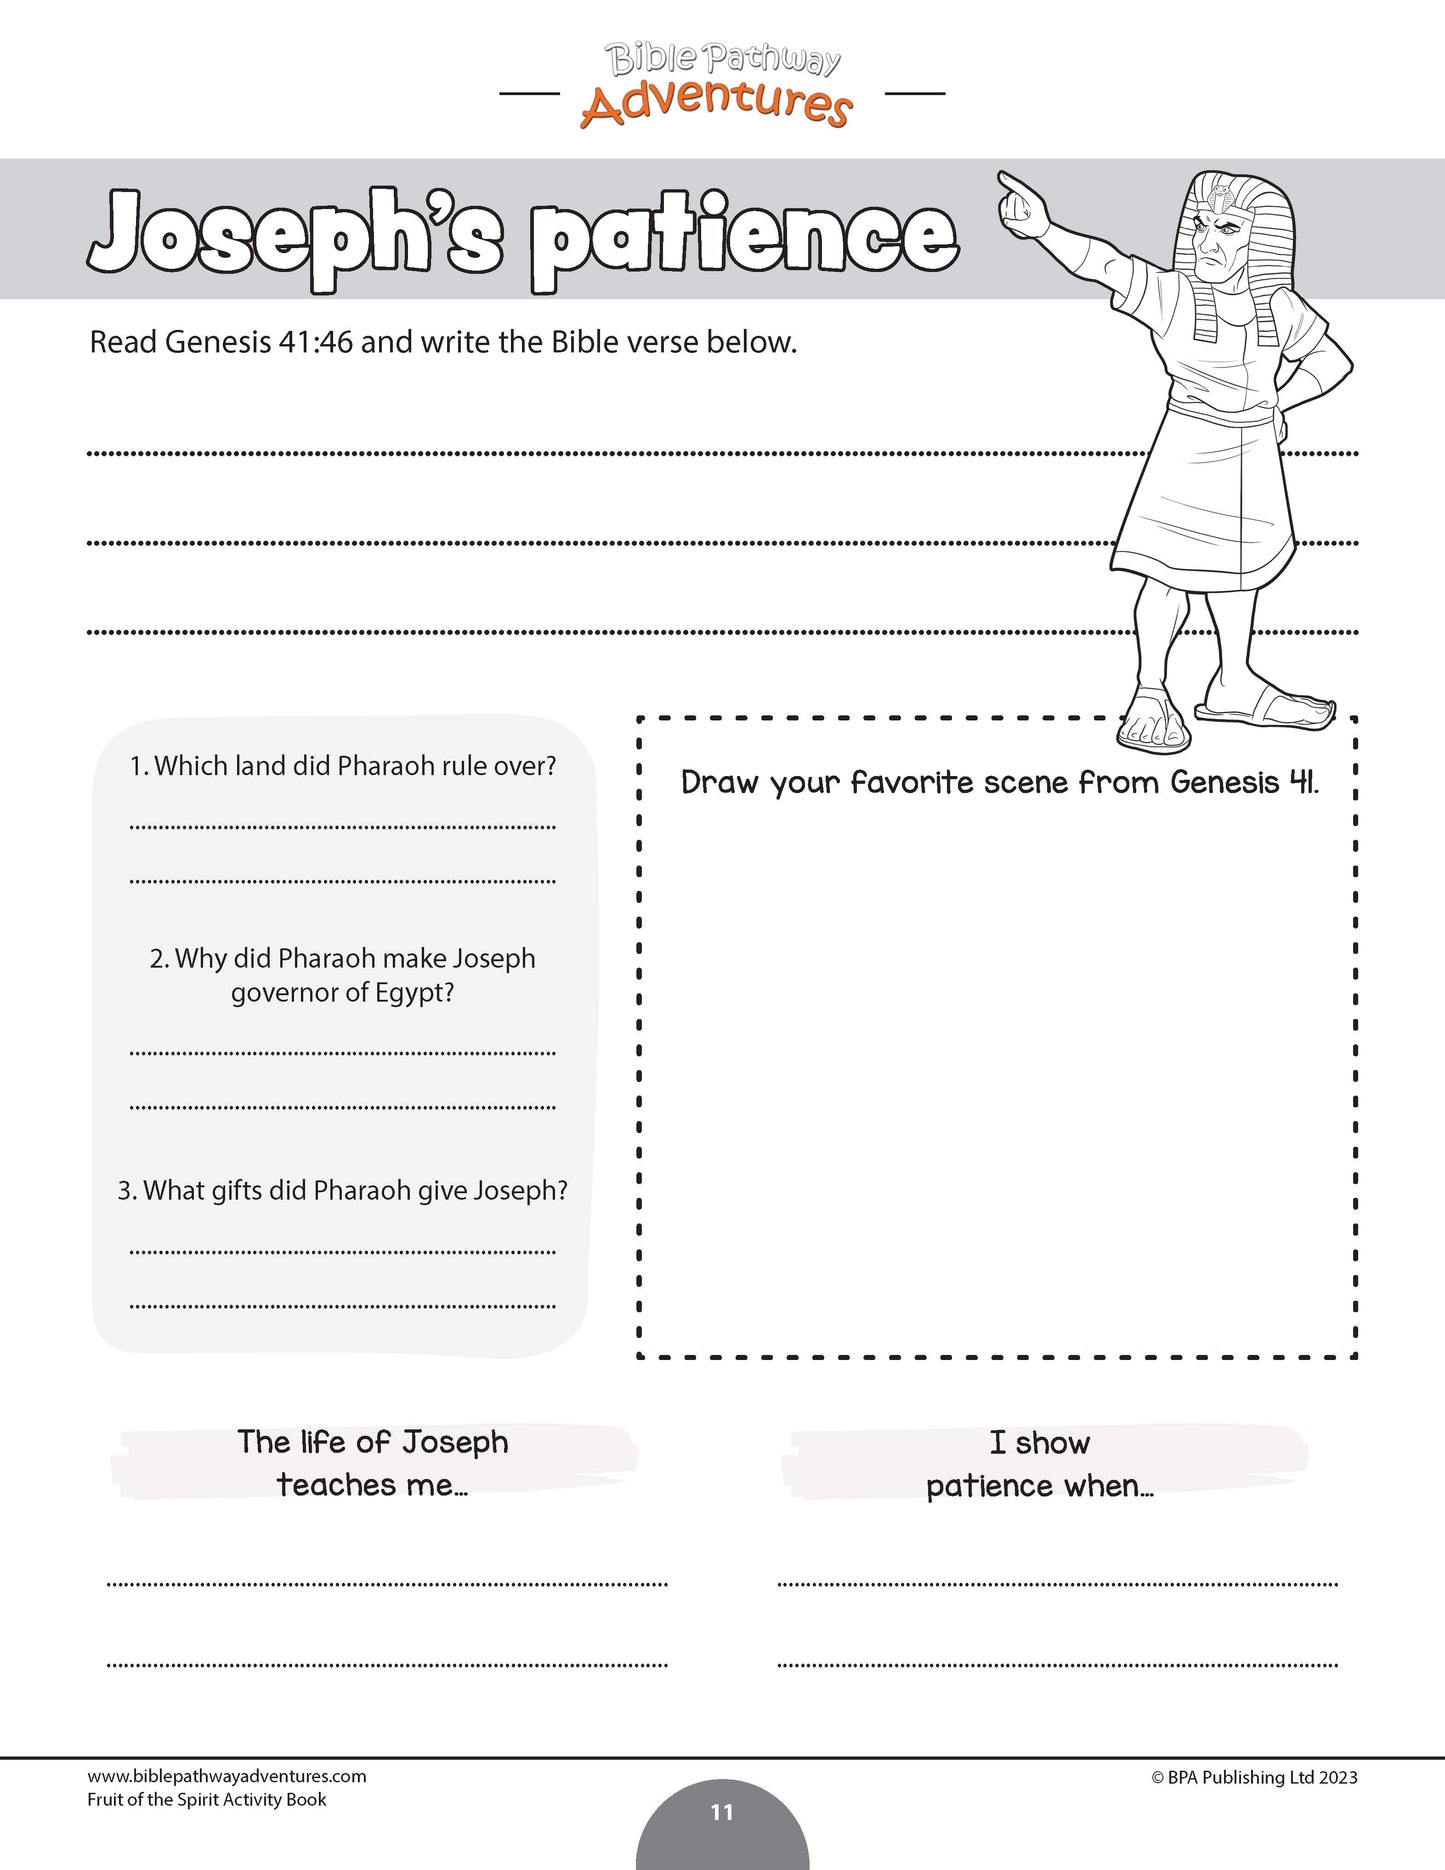 Patience: Fruit of the Spirit Activity Book (PDF)